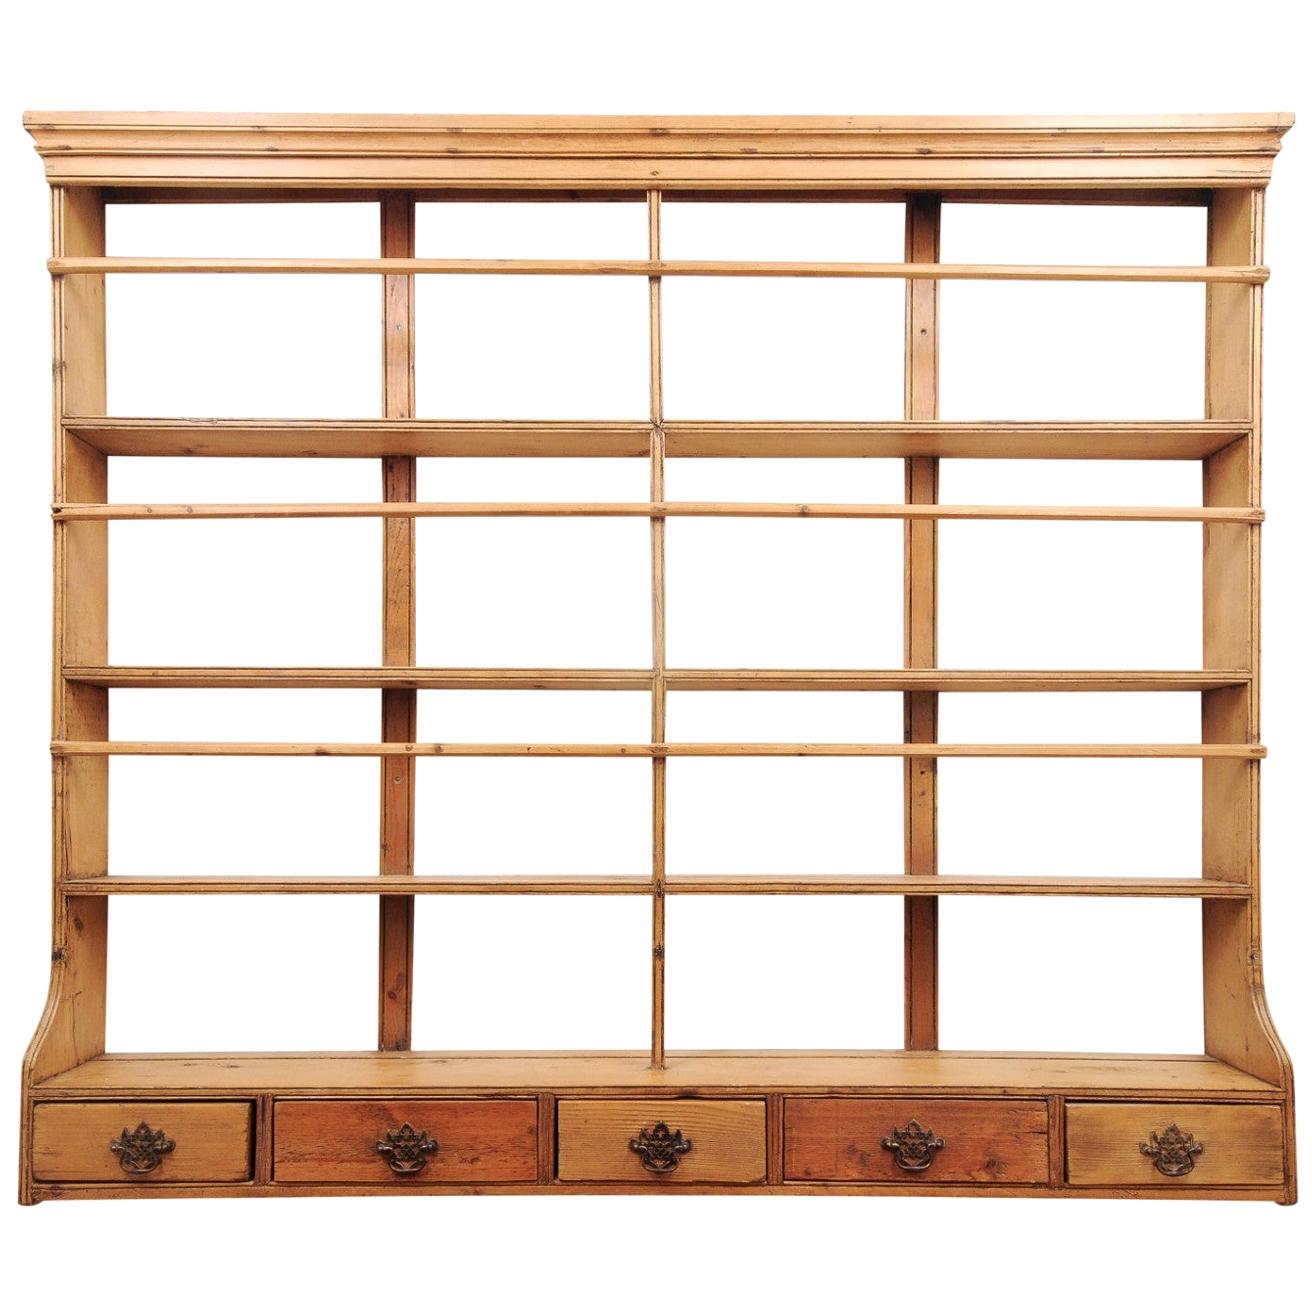 Rustic English 1820s Georgian Period Pine Plate Rack with Five Low Drawers